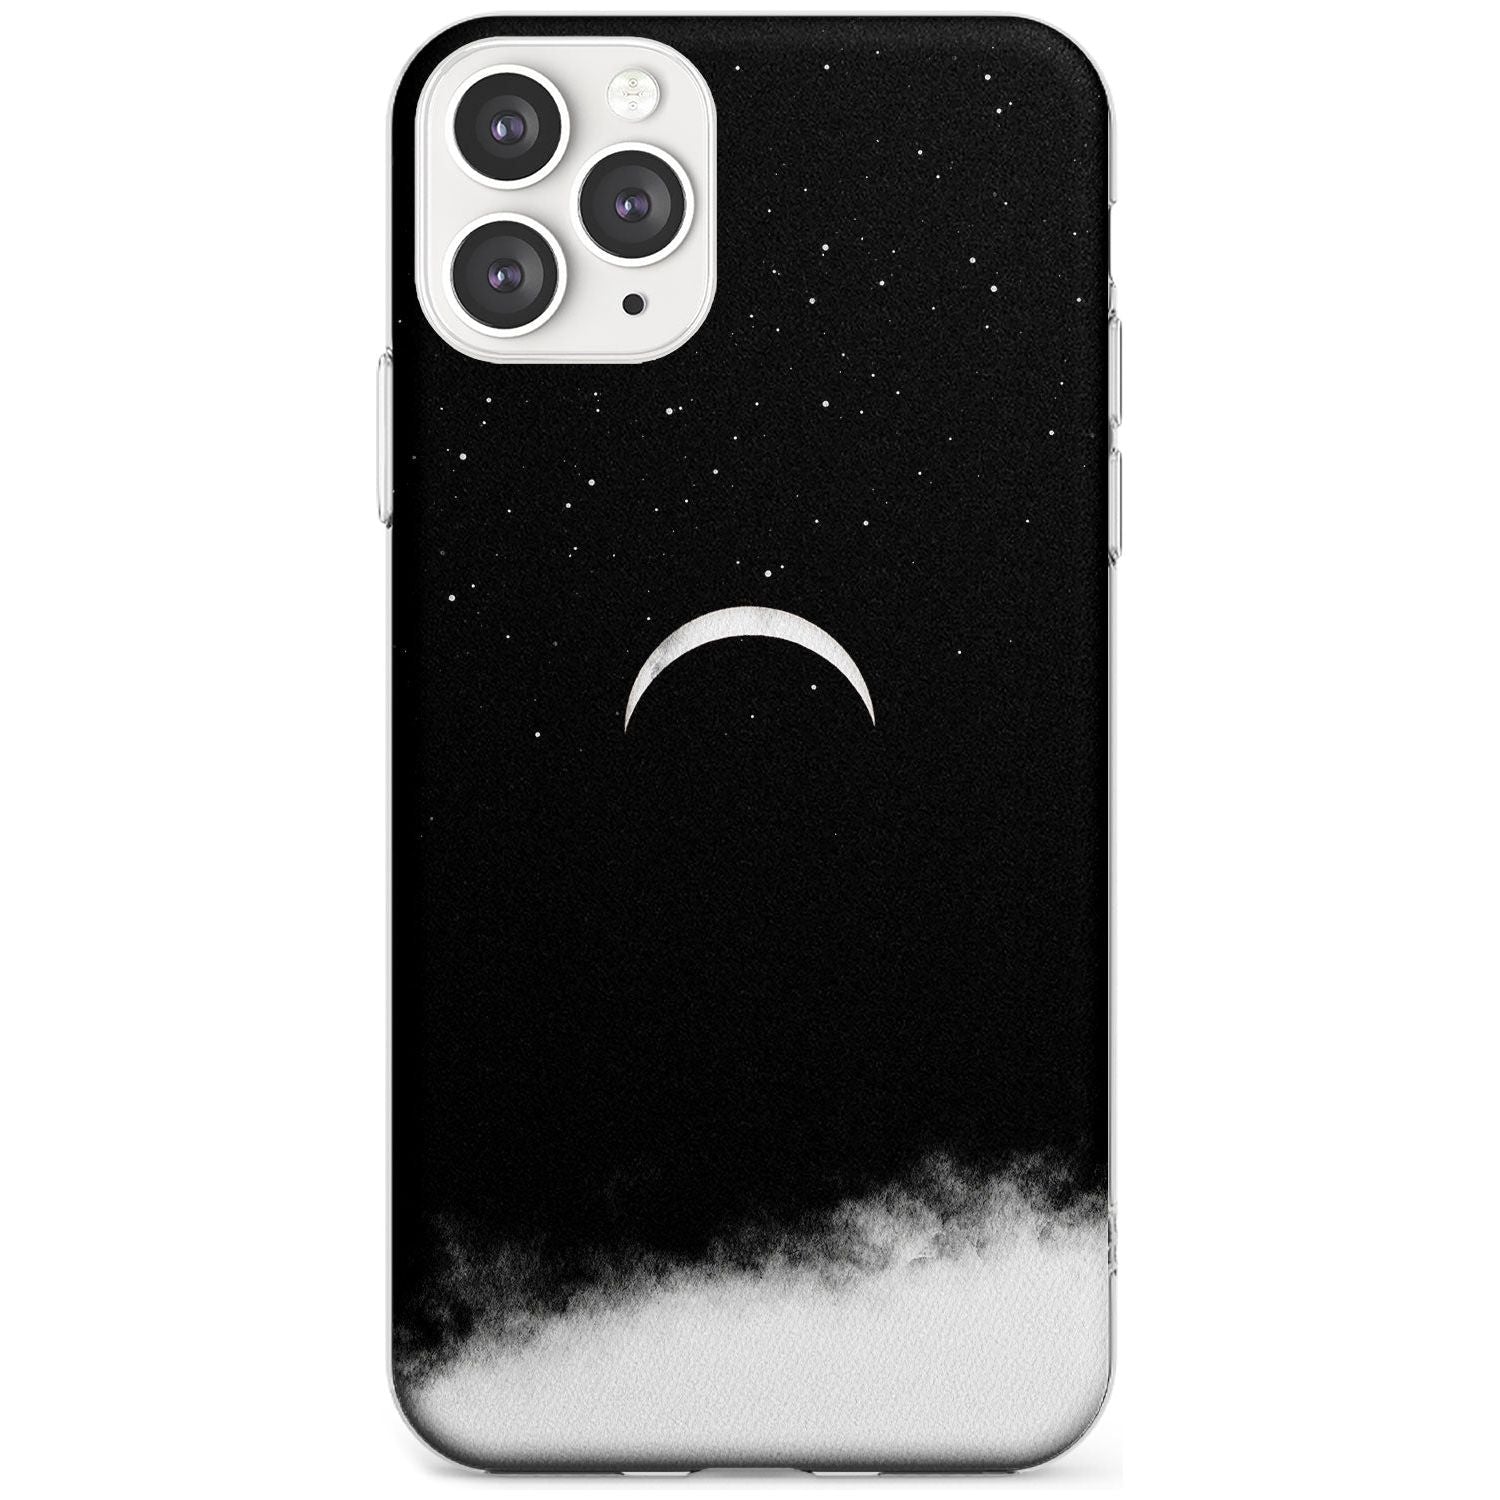 Upside Down Crescent Moon Slim TPU Phone Case for iPhone 11 Pro Max